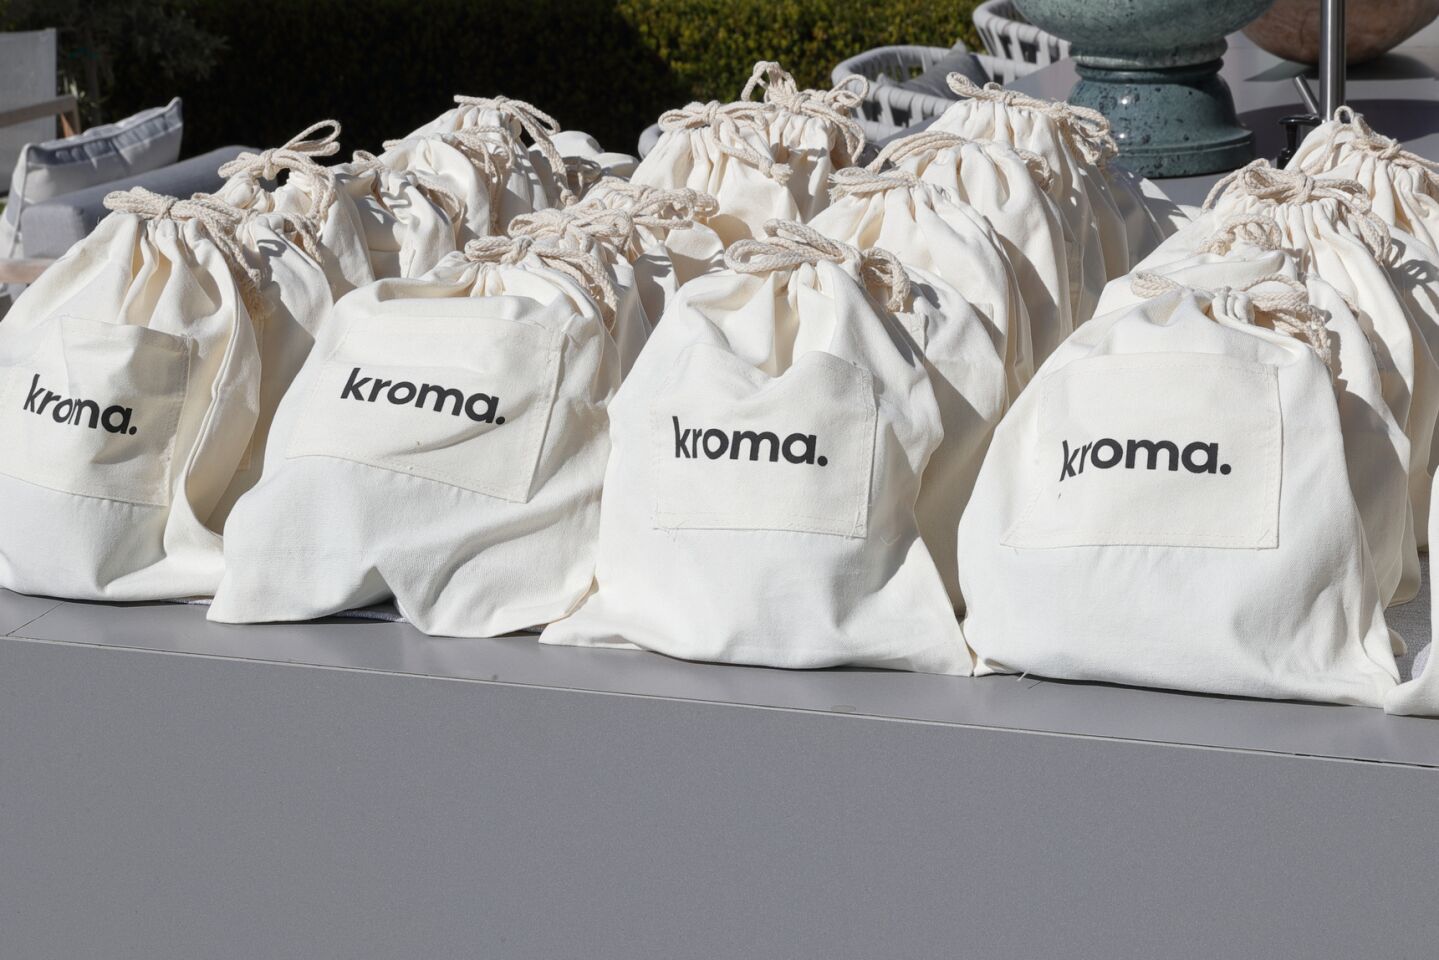 Gift bags from Kroma Wellness, a supporter of Padres Pedal the Cause